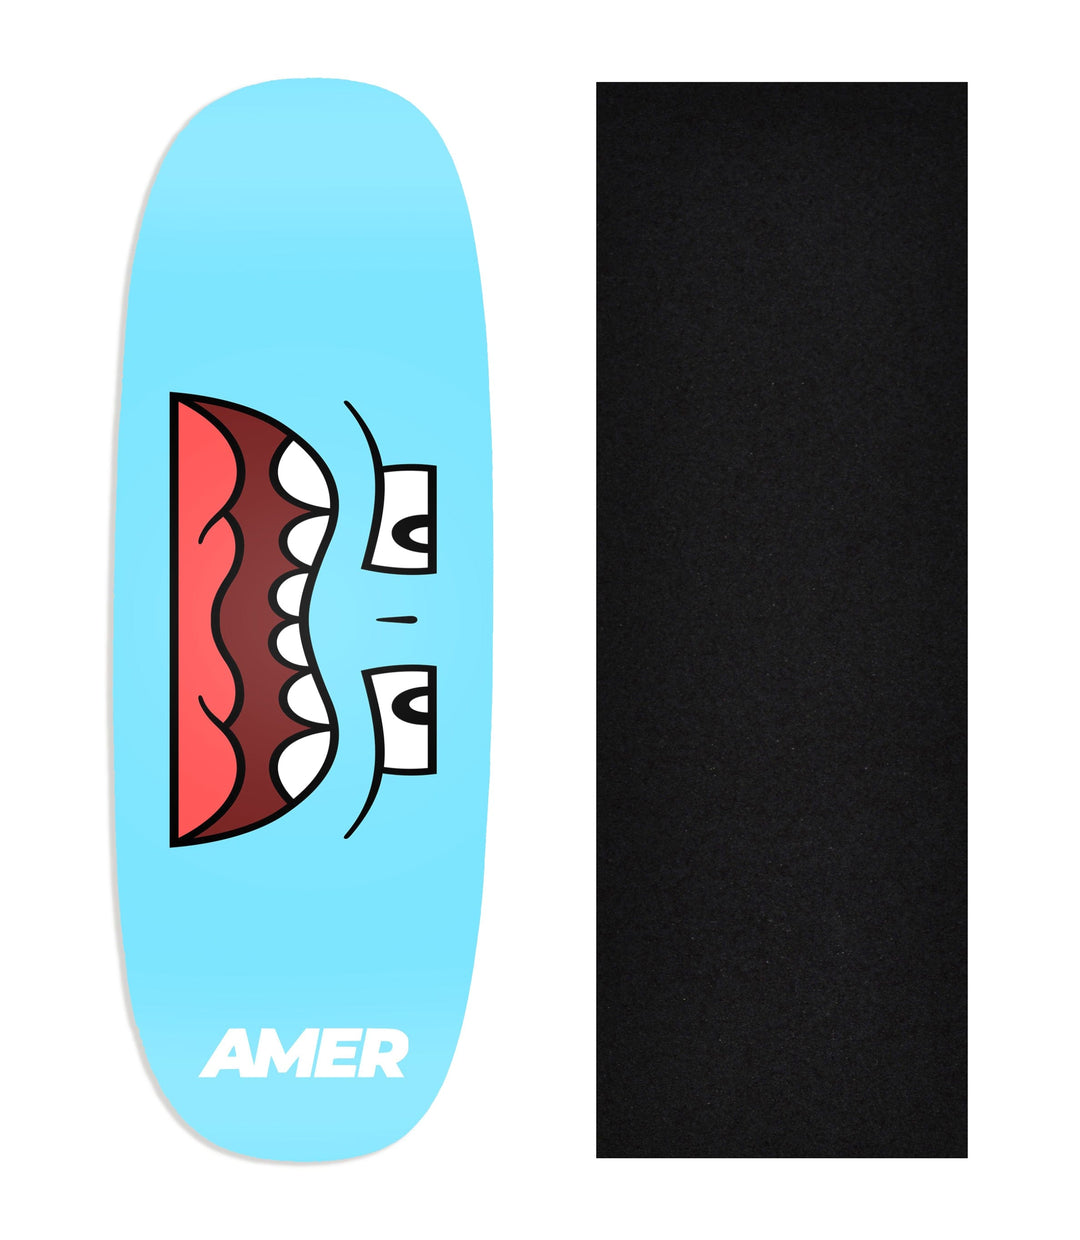 Teak Tuning Heat Transfer Graphic Wooden Fingerboard Deck, Amer - Entry#52 Ohhh Deck